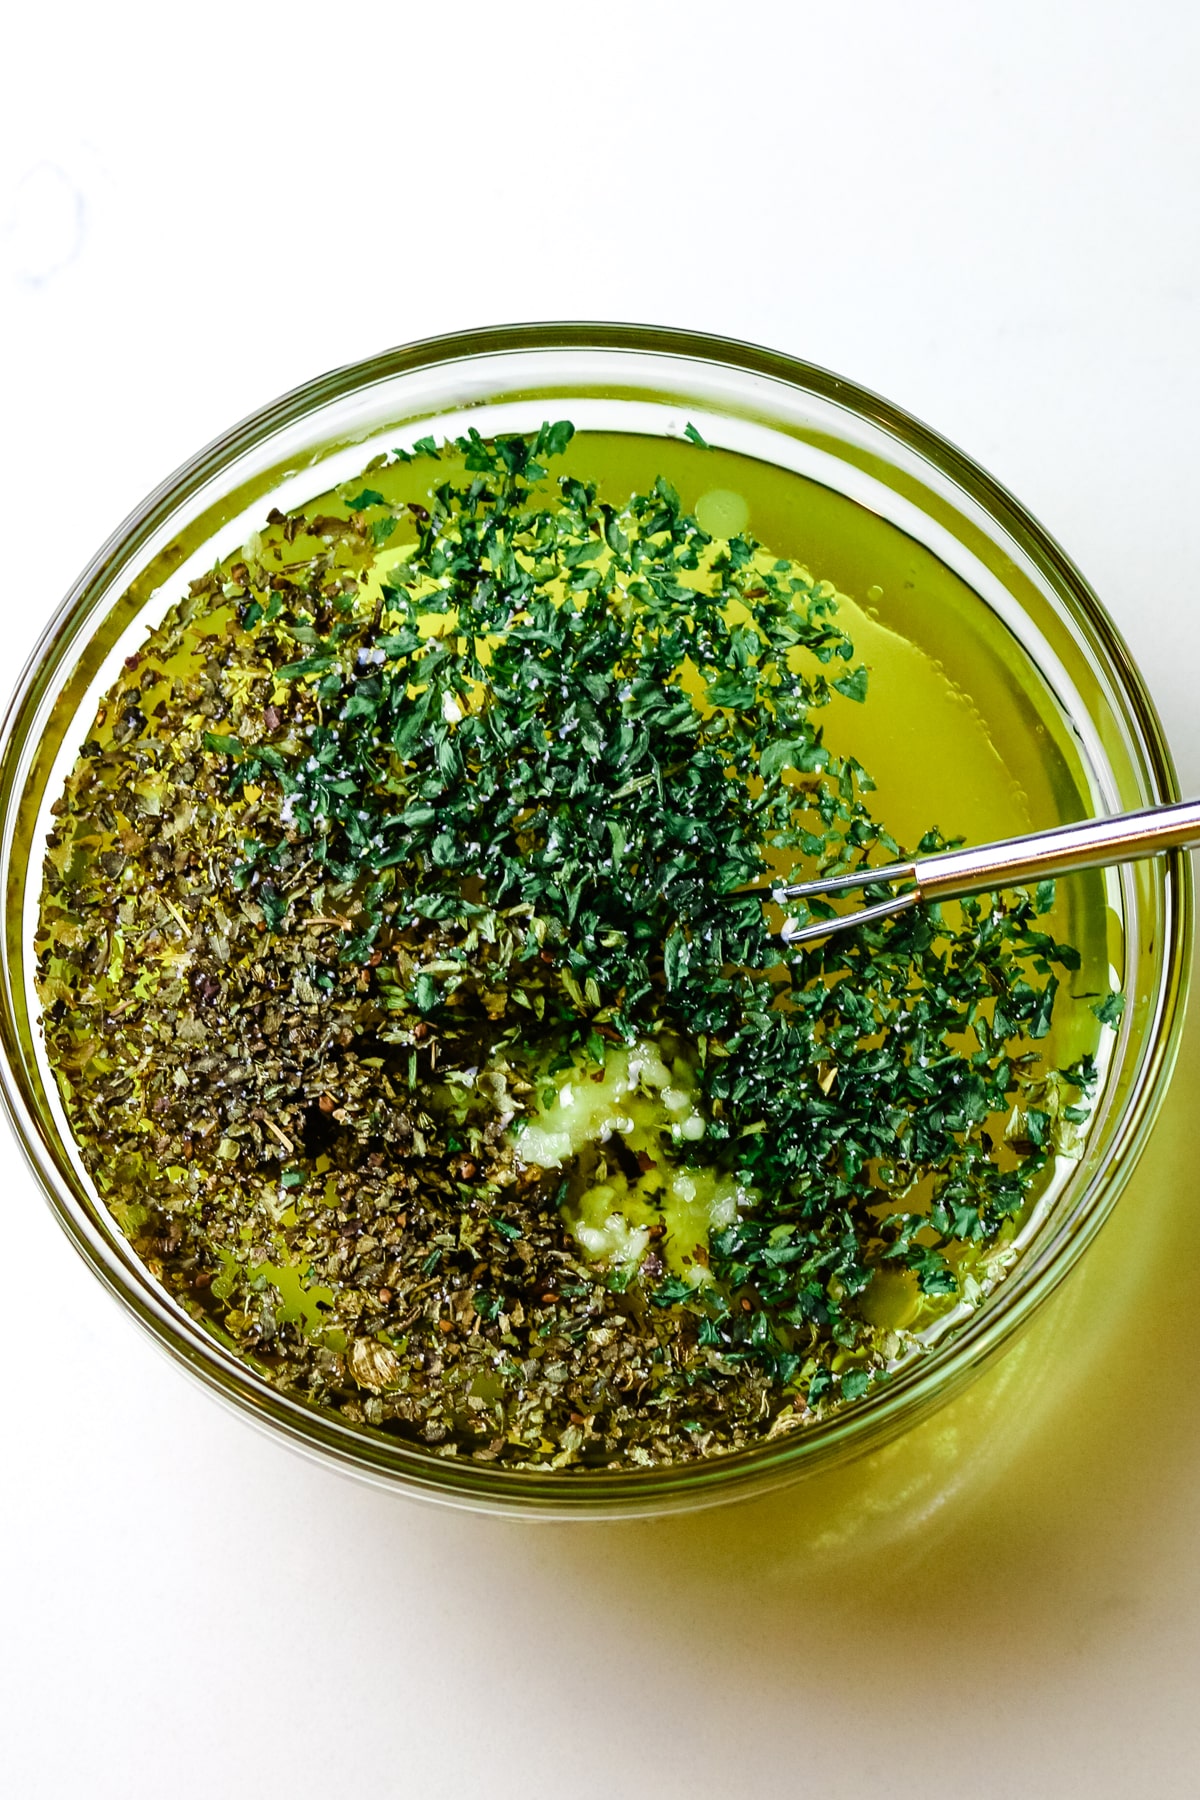 olive oil, herbs, and garlic in a small dish.